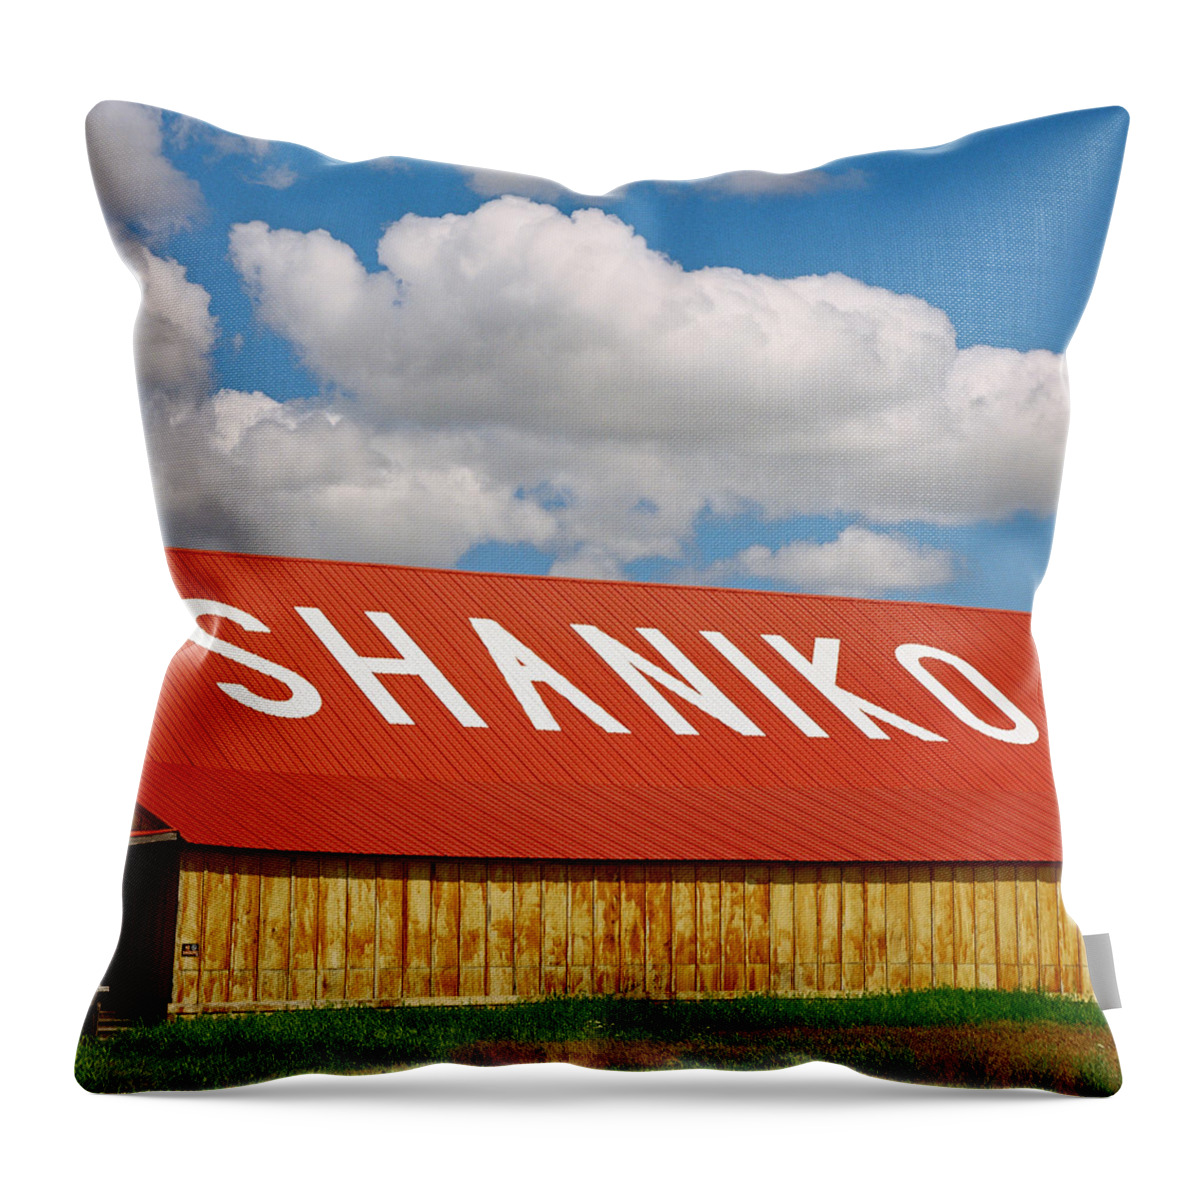 Shaniko Oregon Throw Pillow featuring the photograph Shaniko Sky and Building by Thomas J Rhodes